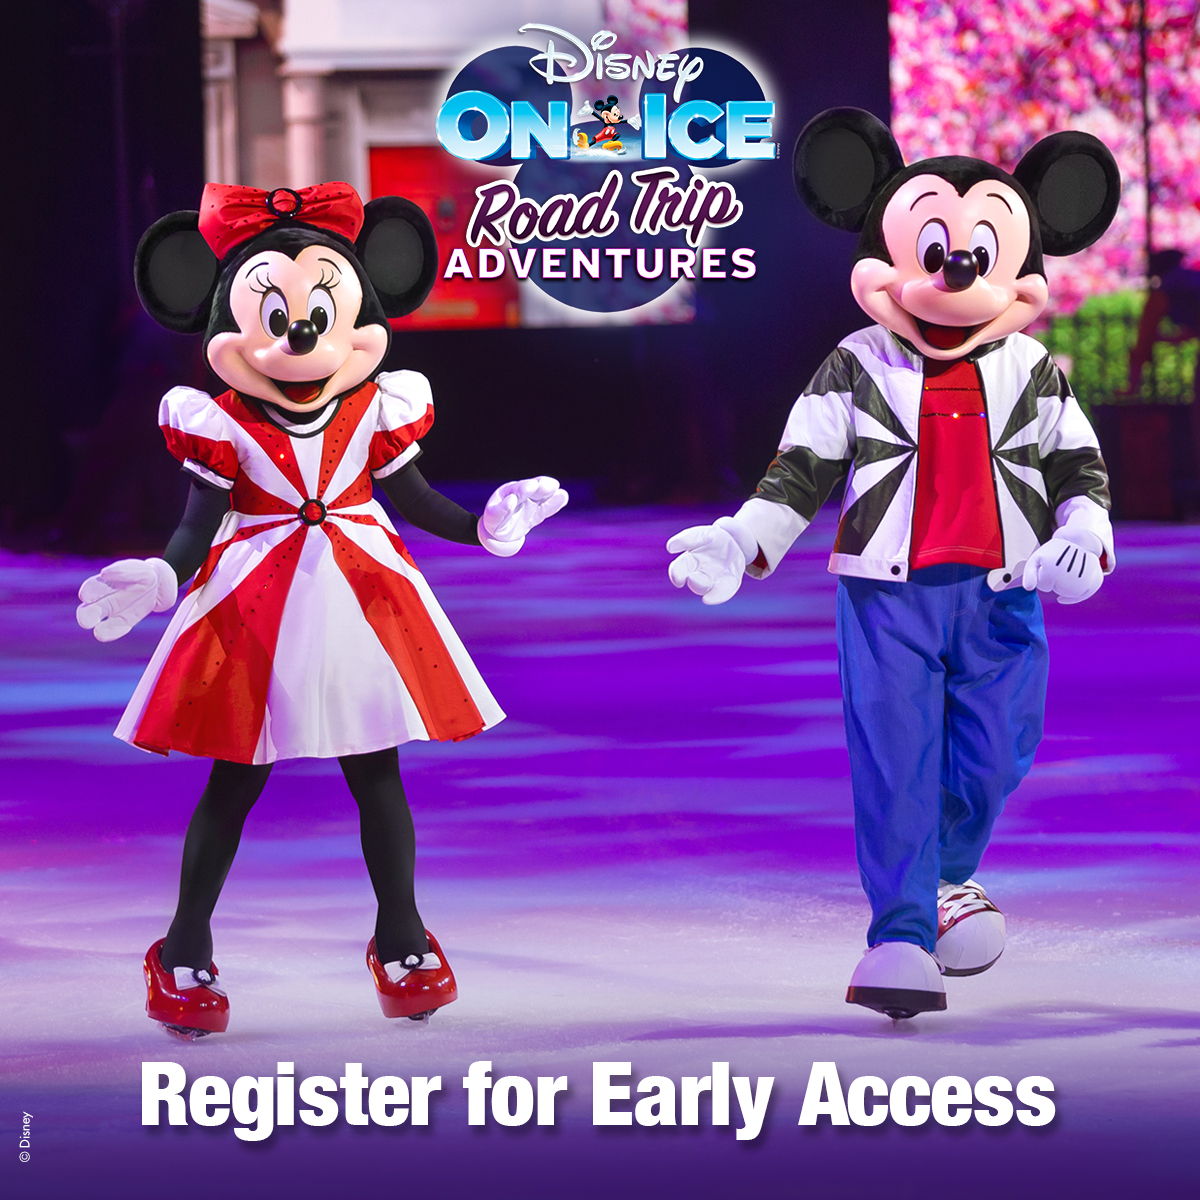 👪 𝗝𝗨𝗦𝗧 𝗜𝗡 👪 Hit the road to adventure when @DisneyOnIce presents Road Trip Adventures skates into Melbourne this July! 🎟 Register: bit.ly/RLA-DISNEYIC24